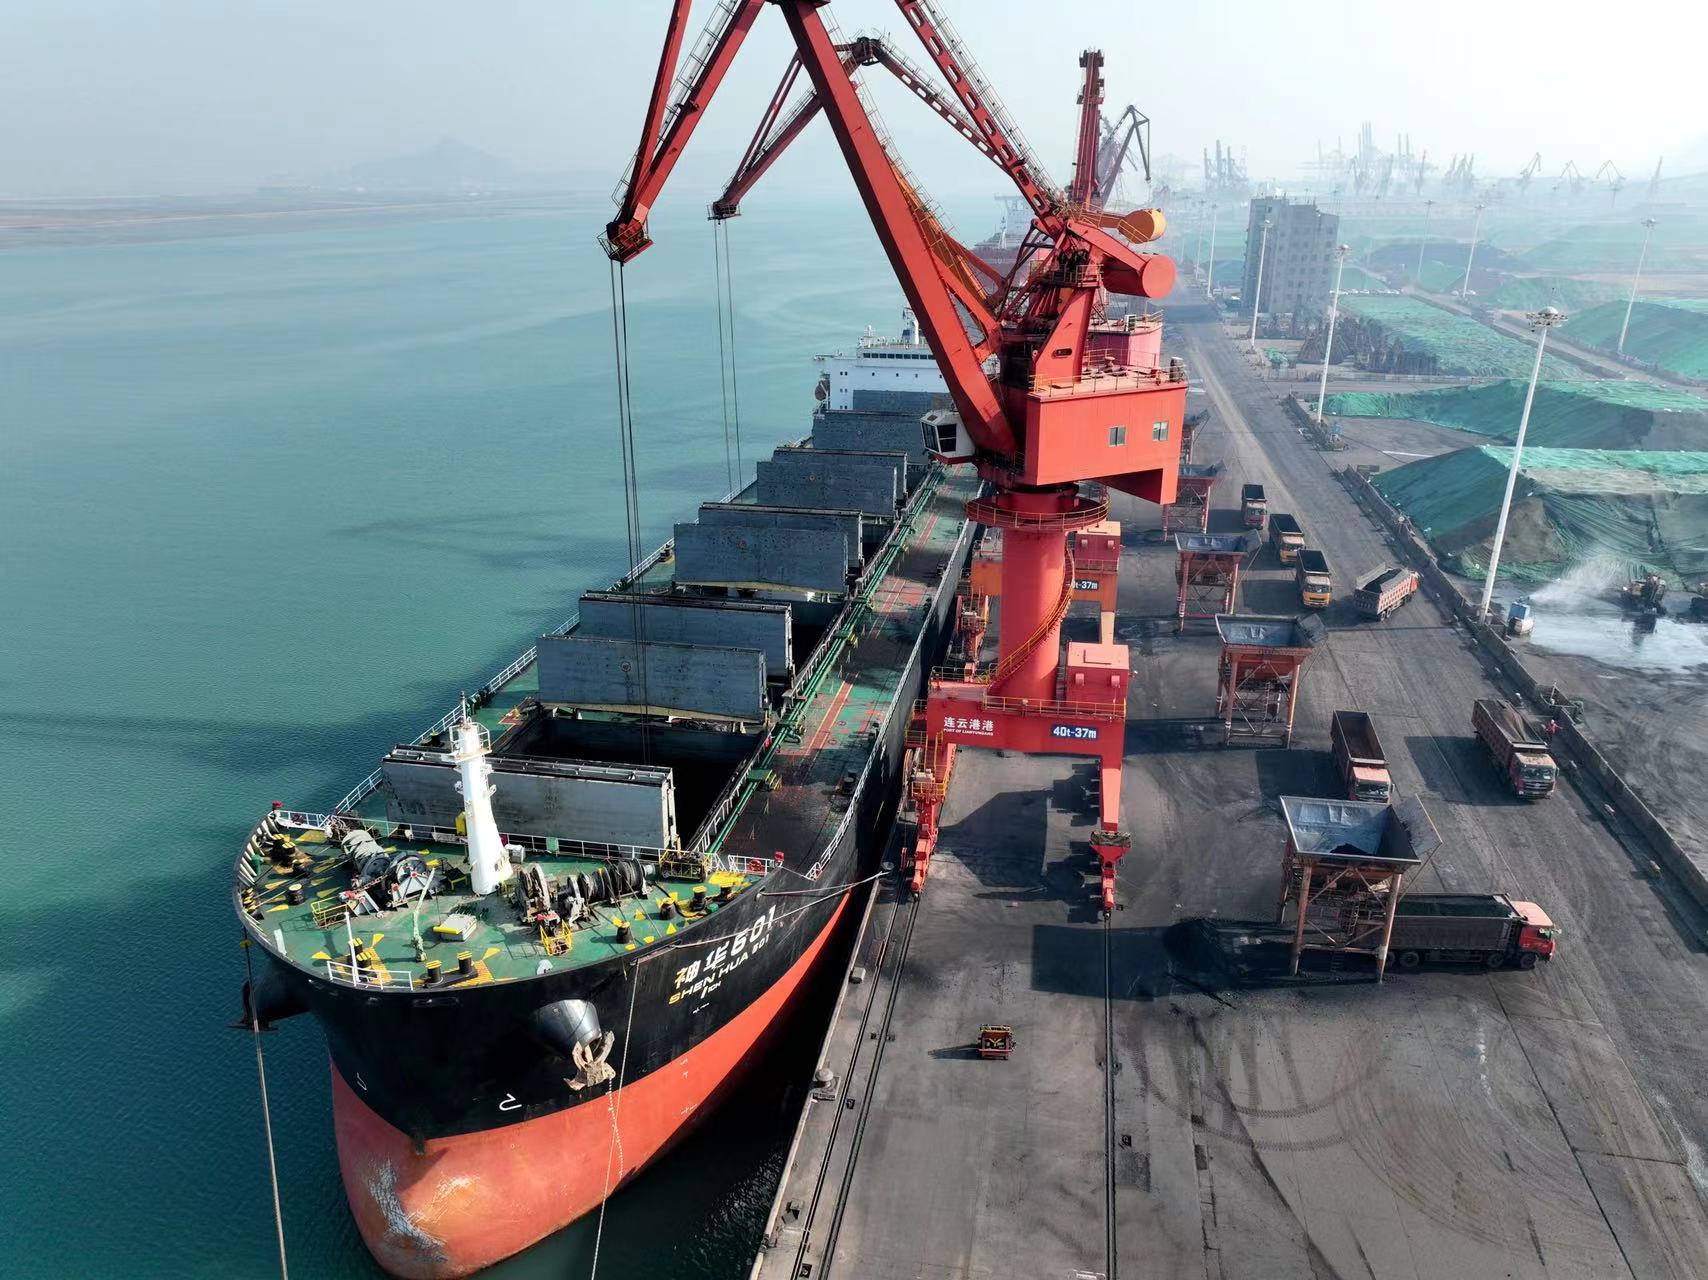 Tons of thermal coal are unloaded and transported at a port in Lianyungang, East China’s Jiangsu Province on December 21, 2022. Local port authorities have opened a green channel for winter coal transportation, which operates 24 hours a day, so as to meet soaring winter heating demand. Photo: VCG